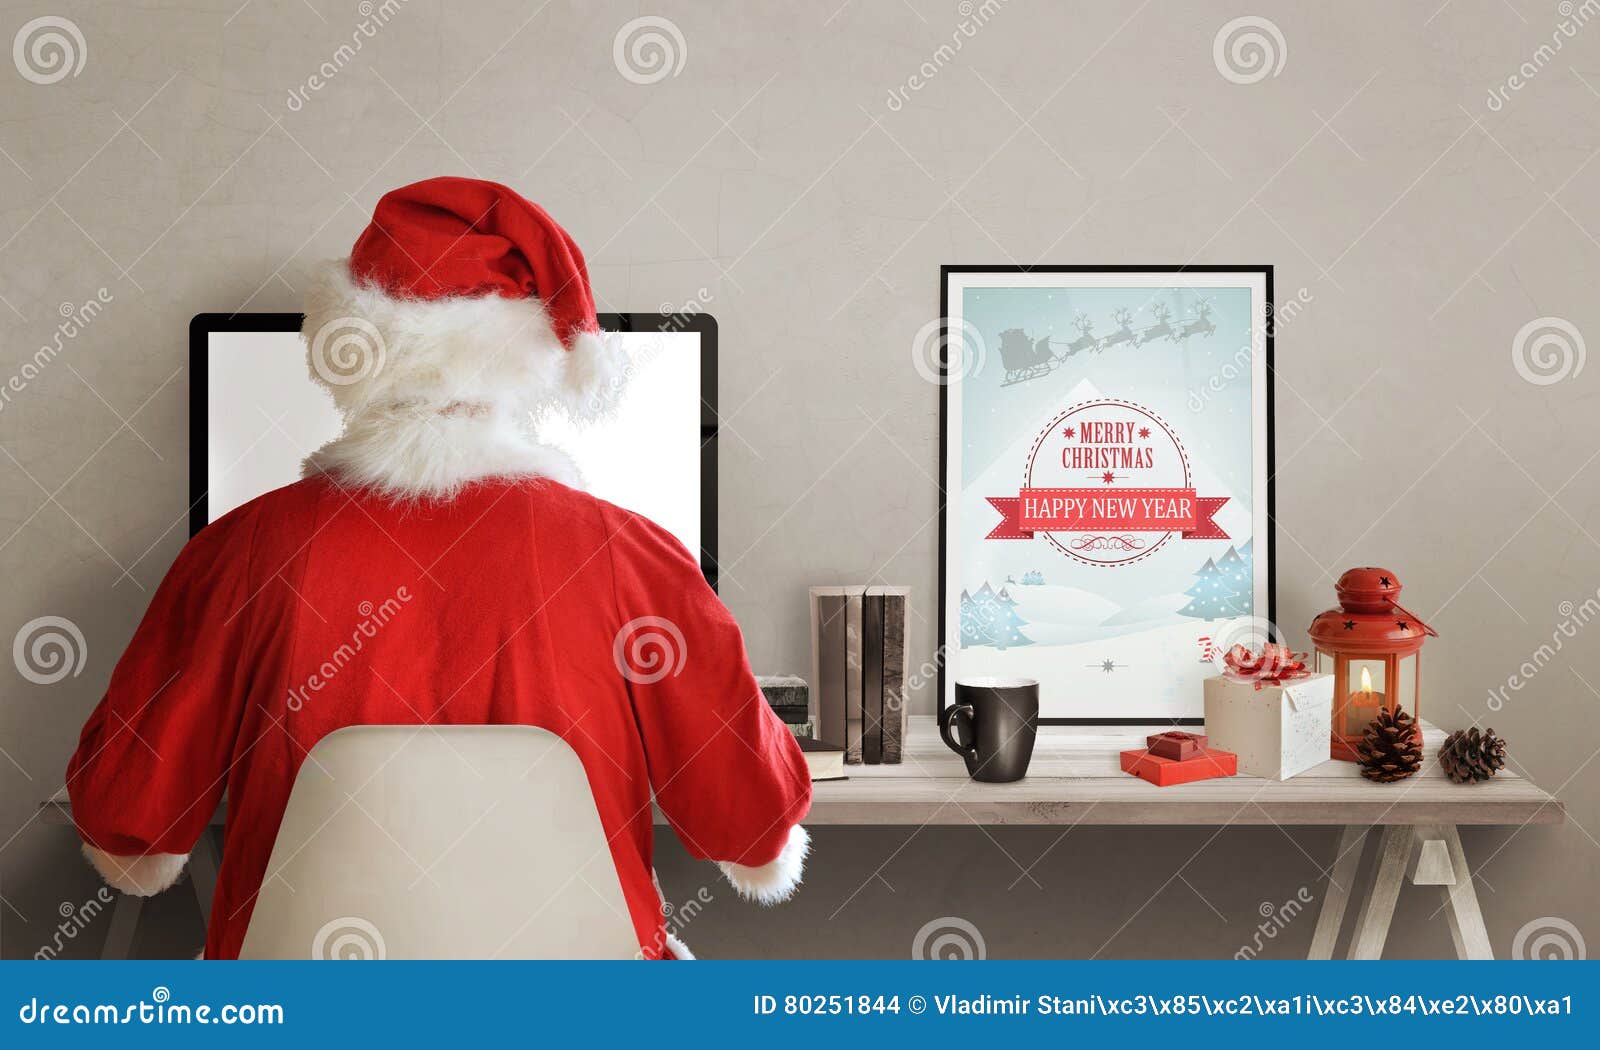 santa claus surfs the web on laptop. on his table is lantern, picture, gifts, books and a cup of hot tea